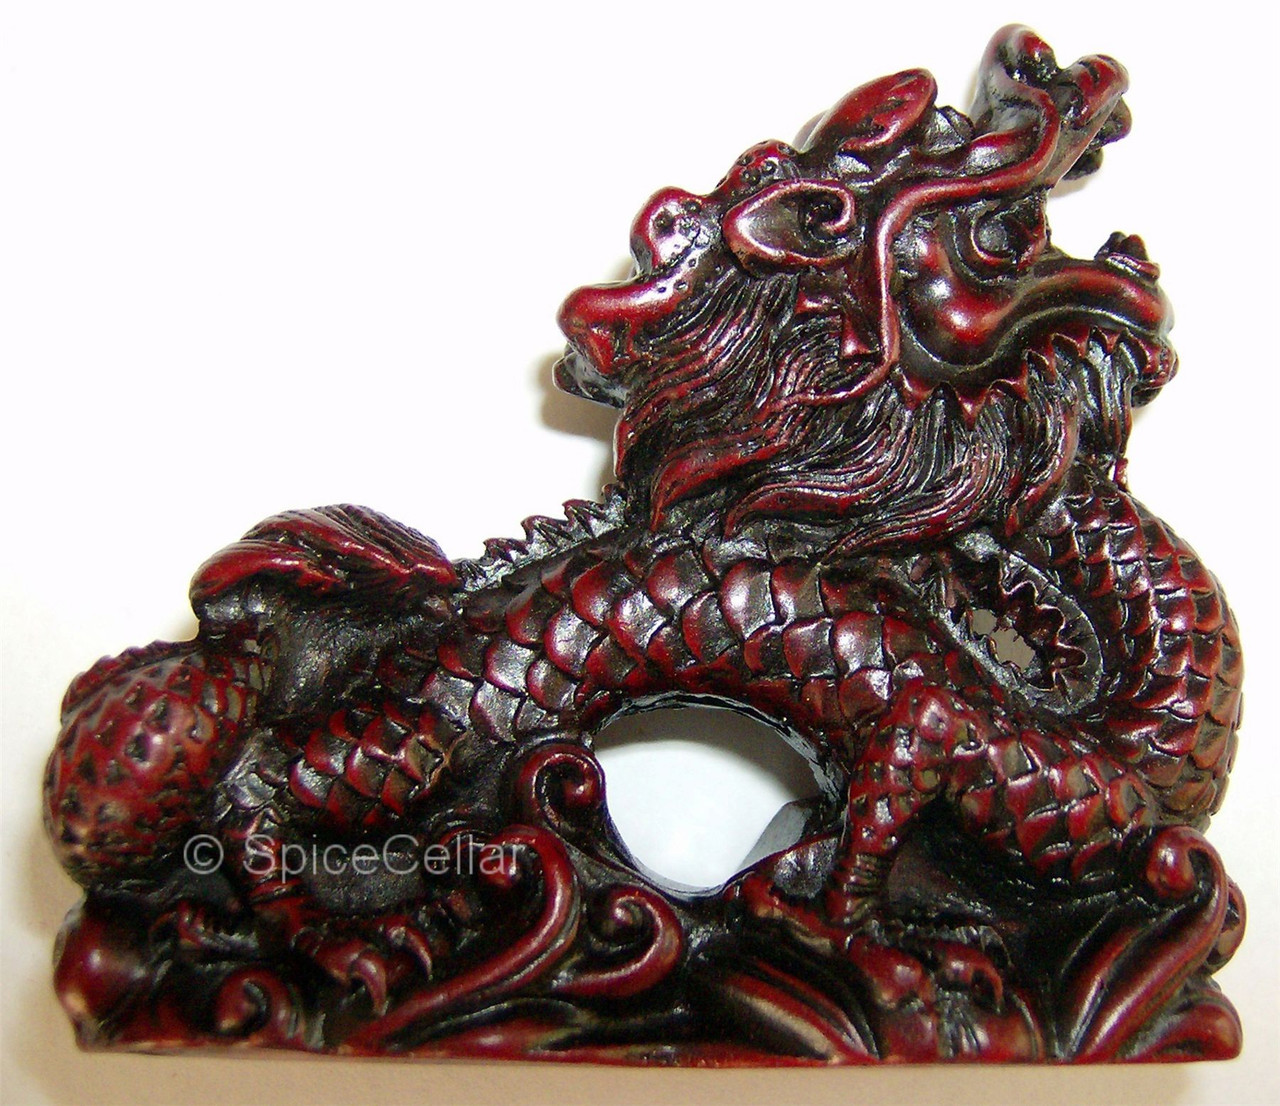 Chinese Dragon Statues - 7cm - Set of 8 - Red Resin - Feng Shui